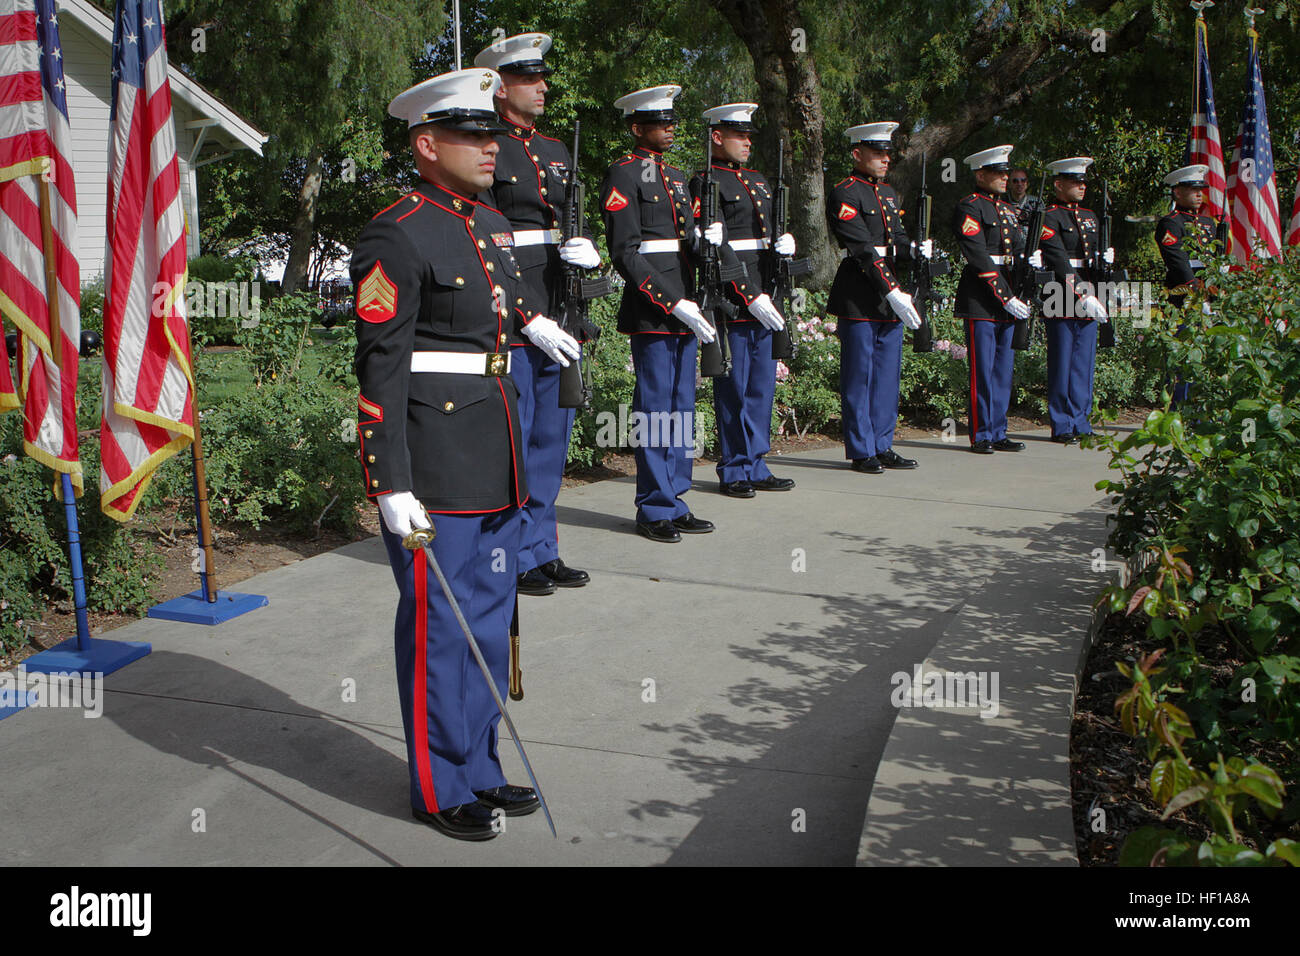 Sergeant Casimiro Zarate, a Bunkerville, Nev., native serving with 1st Reconnaissance Battalion, leads a seven-man rifle detail in a salute during the playing of 'Taps' at the Richard Nixon Presidential Library and Museum for the Vietnam Prisoner of War 40th Annual Homecoming Reunion here, May 23, 2013. Nearly 200 former Vietnam POWs and their families gathered at the Nixon Presidential Library on the 40th anniversary of when President Nixon hosted the service members for the largest dinner ever held at the White House, May 24, 1973, on the South Lawn. 1st Marine Division honors 40th Annual Vi Stock Photo